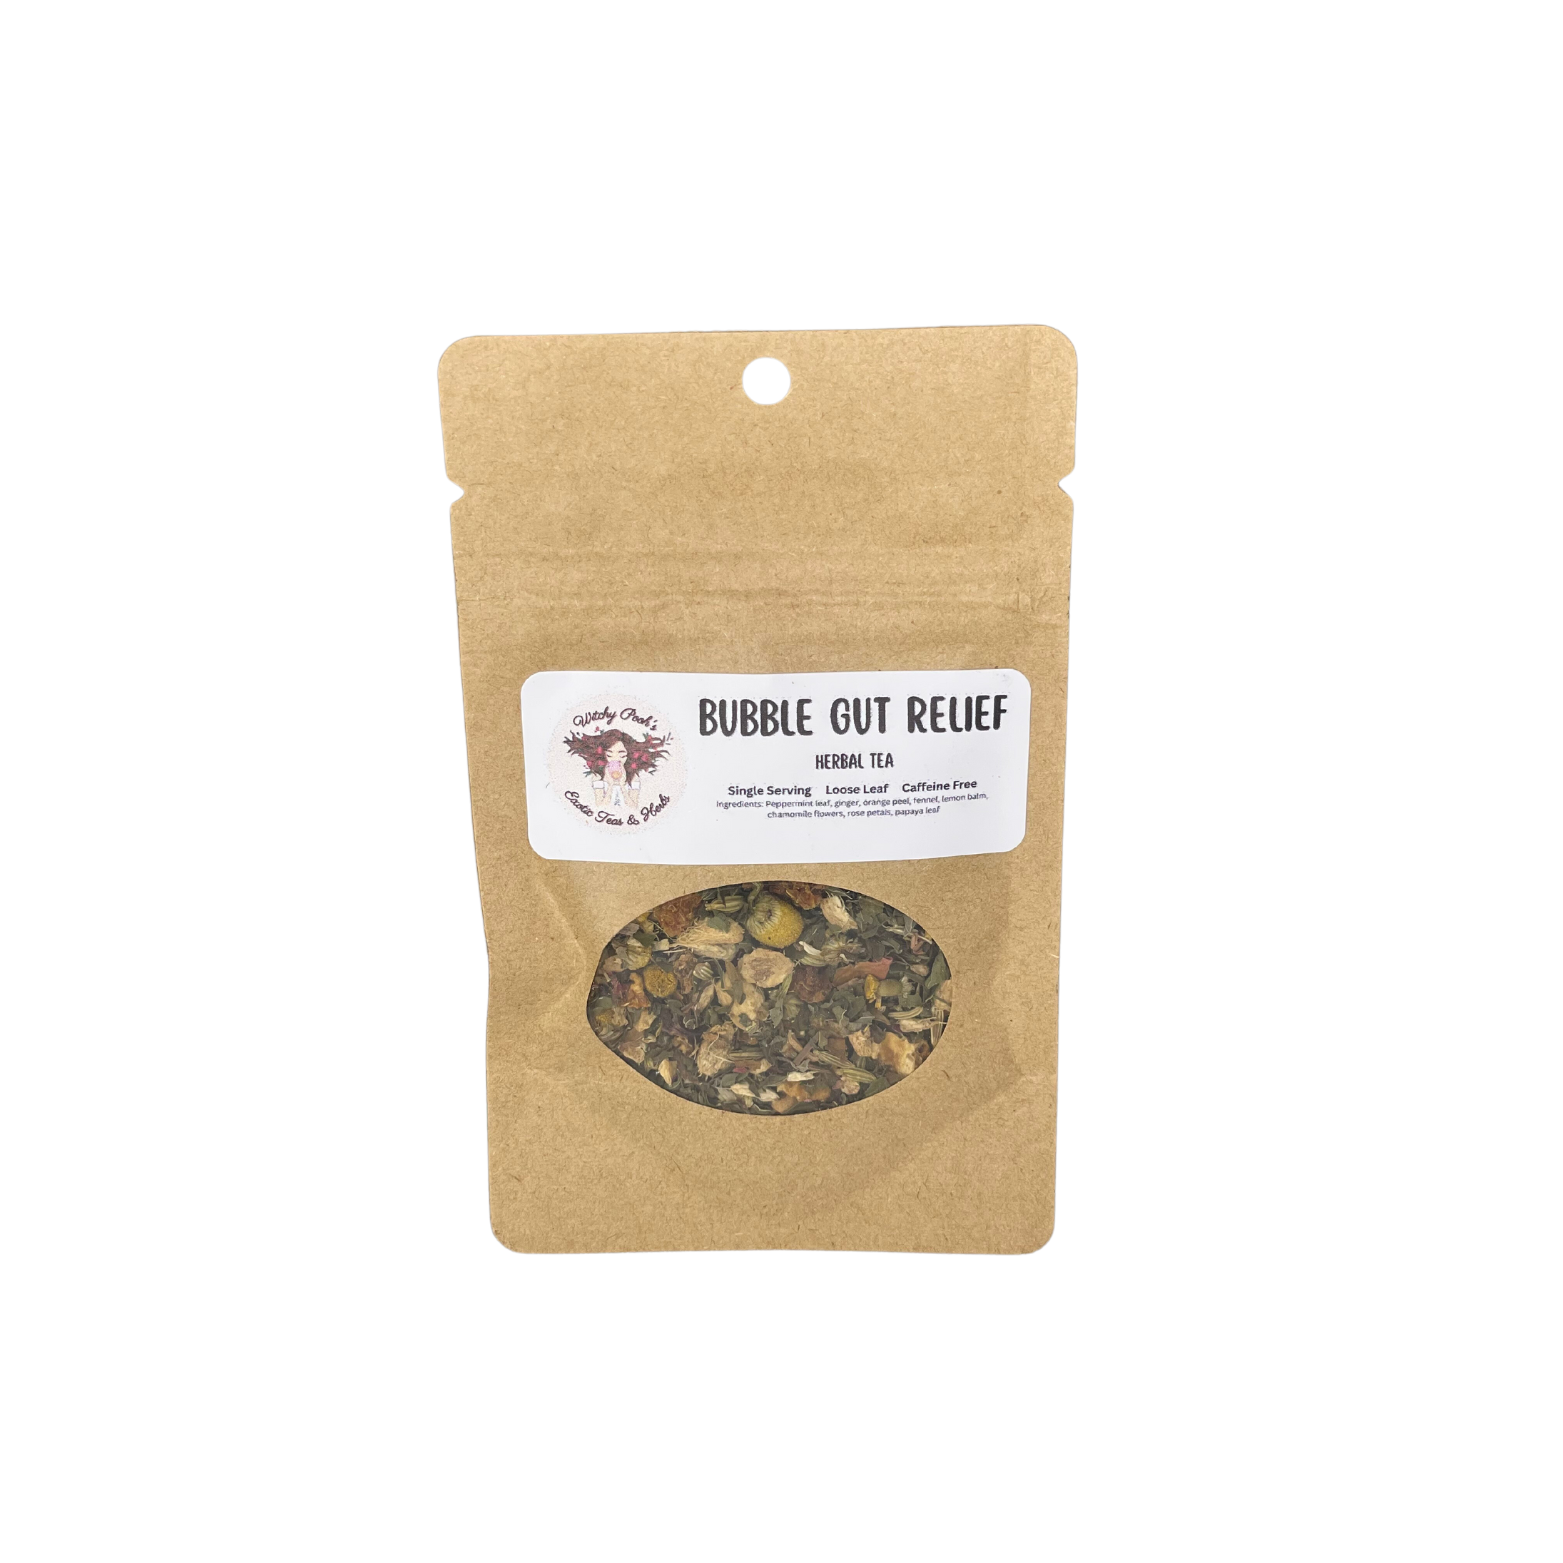 Witchy Pooh's Bubble Gut Relief Loose Leaf Herbal Functional Tea, Caffeine Free, For Digestive Issues-15